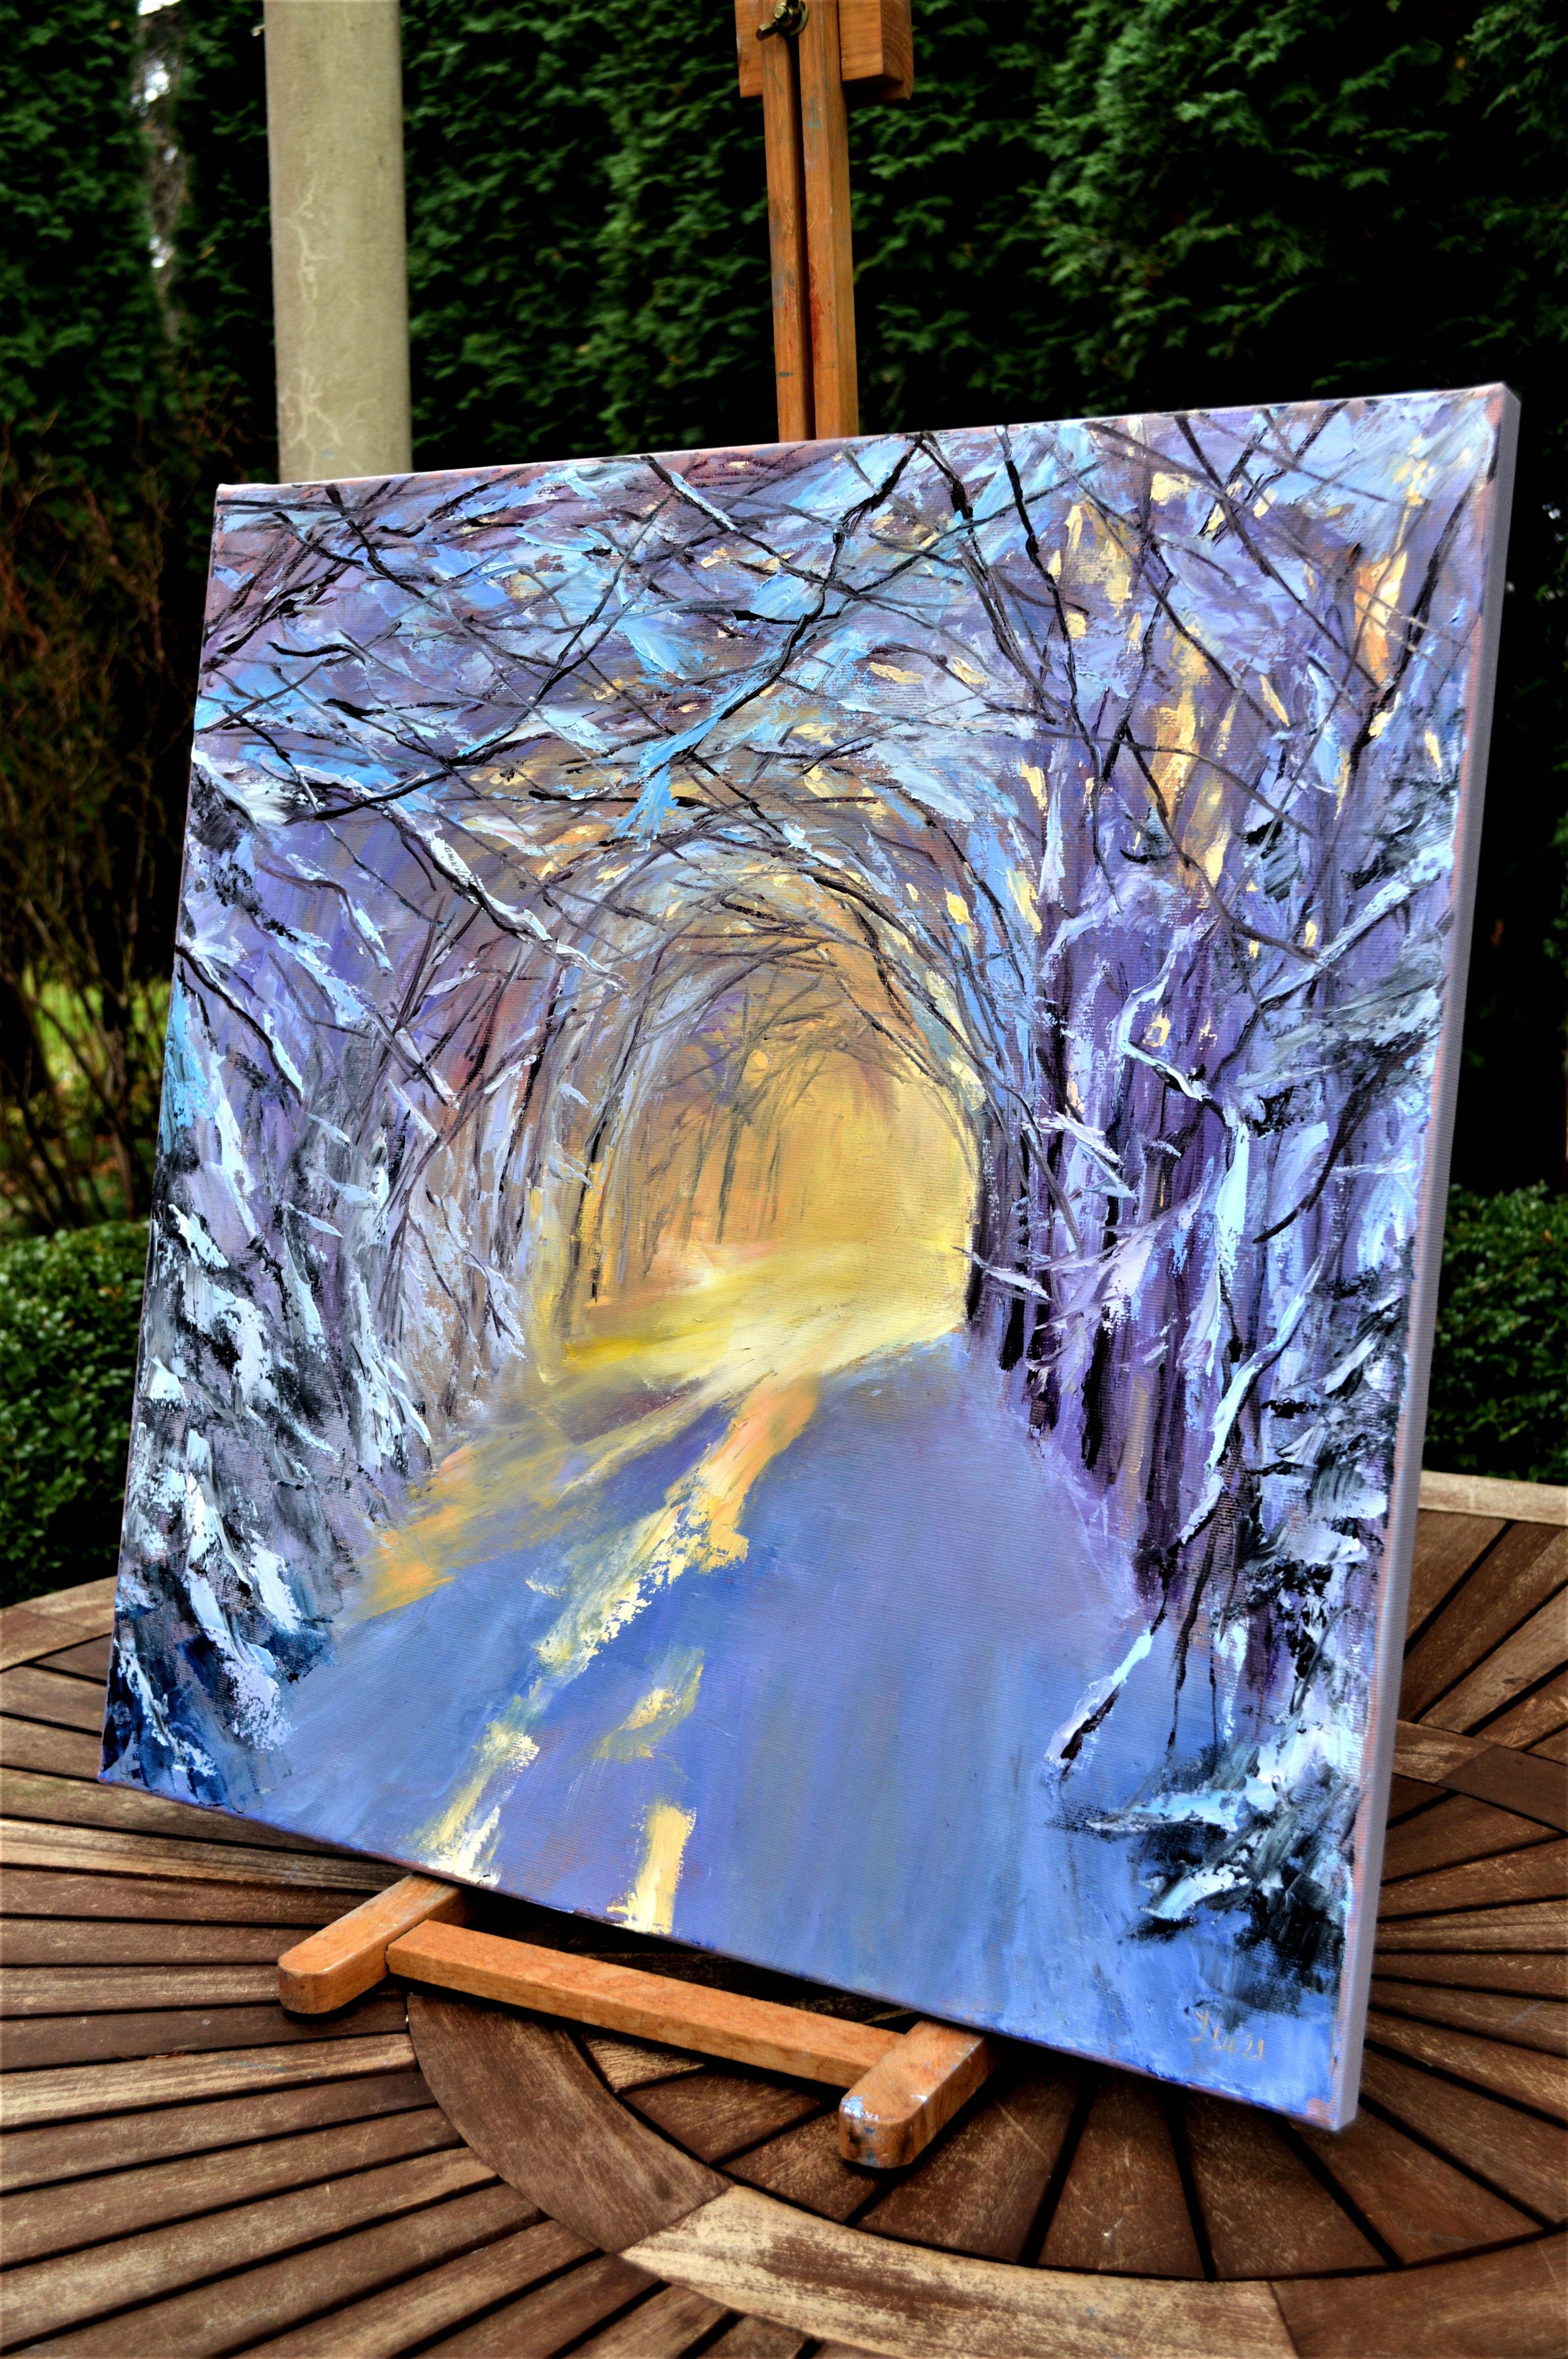 In this painting, I poured my heart into capturing the serene embrace of winter. The play of light against the snow-clad trees creates a captivating dance of colors and shadows, inviting the viewer on a tranquil journey through this still alley.